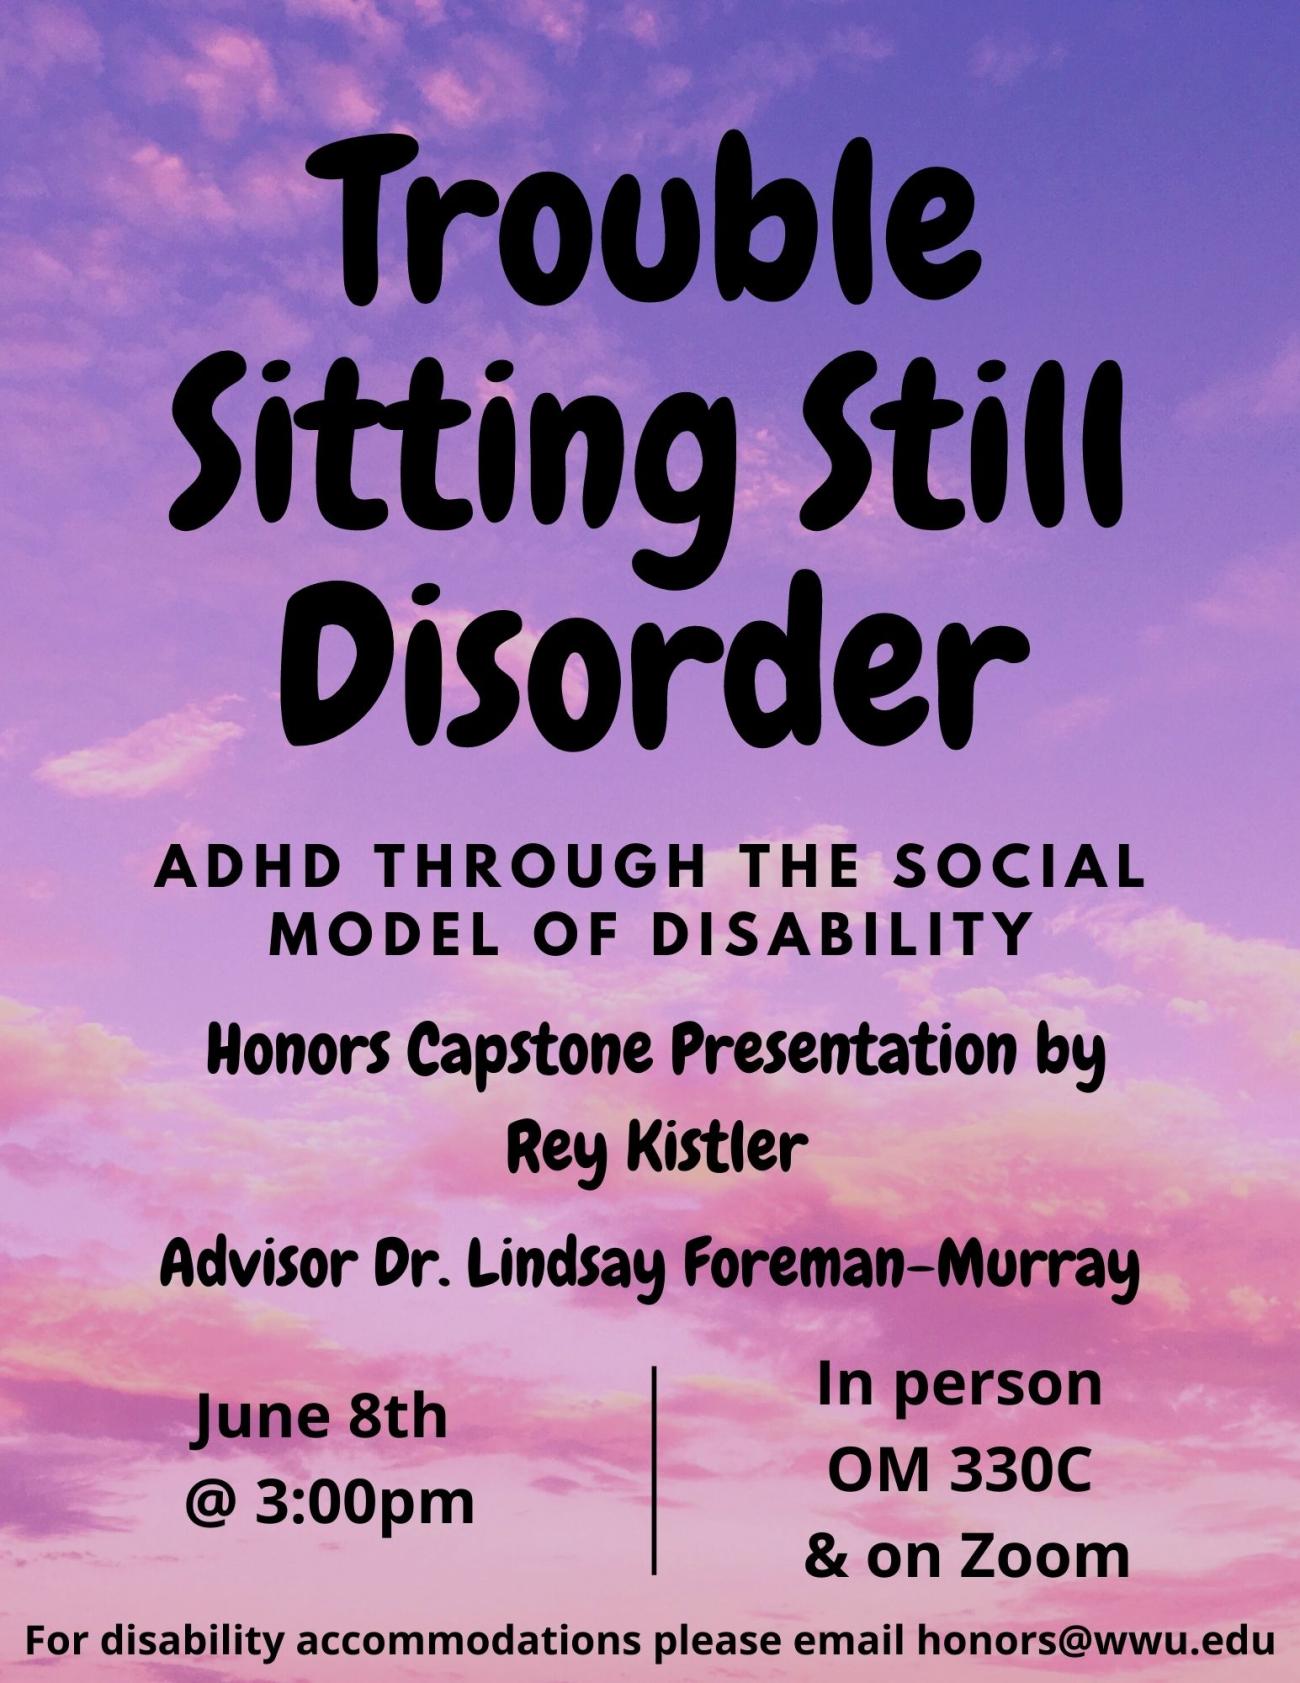 On a gradient purple-to-pink cloudy sky background text reads "Trouble Sitting Still Disorder. ADHD Through the Social Model of Disability. Honors Capstone Presentation by Rey Kistler. Advisor Dr. Lindsay Foreman-Murray. June 8th at 3:00pm. In person OM 330C and on Zoom. For disability accommodations please email honors@wwu.edu."